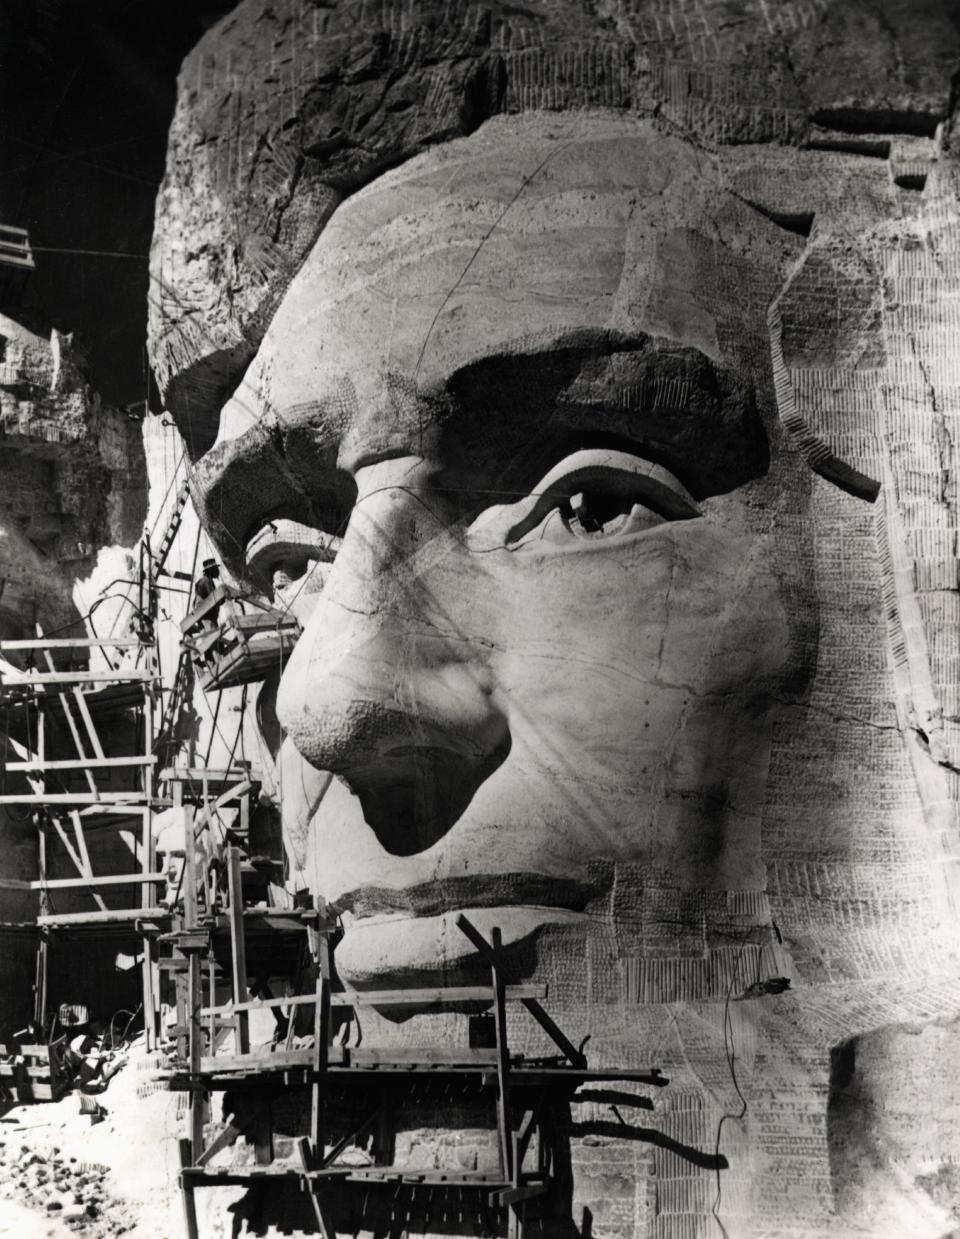 Lincoln's head under construction on Mount Rushmore.